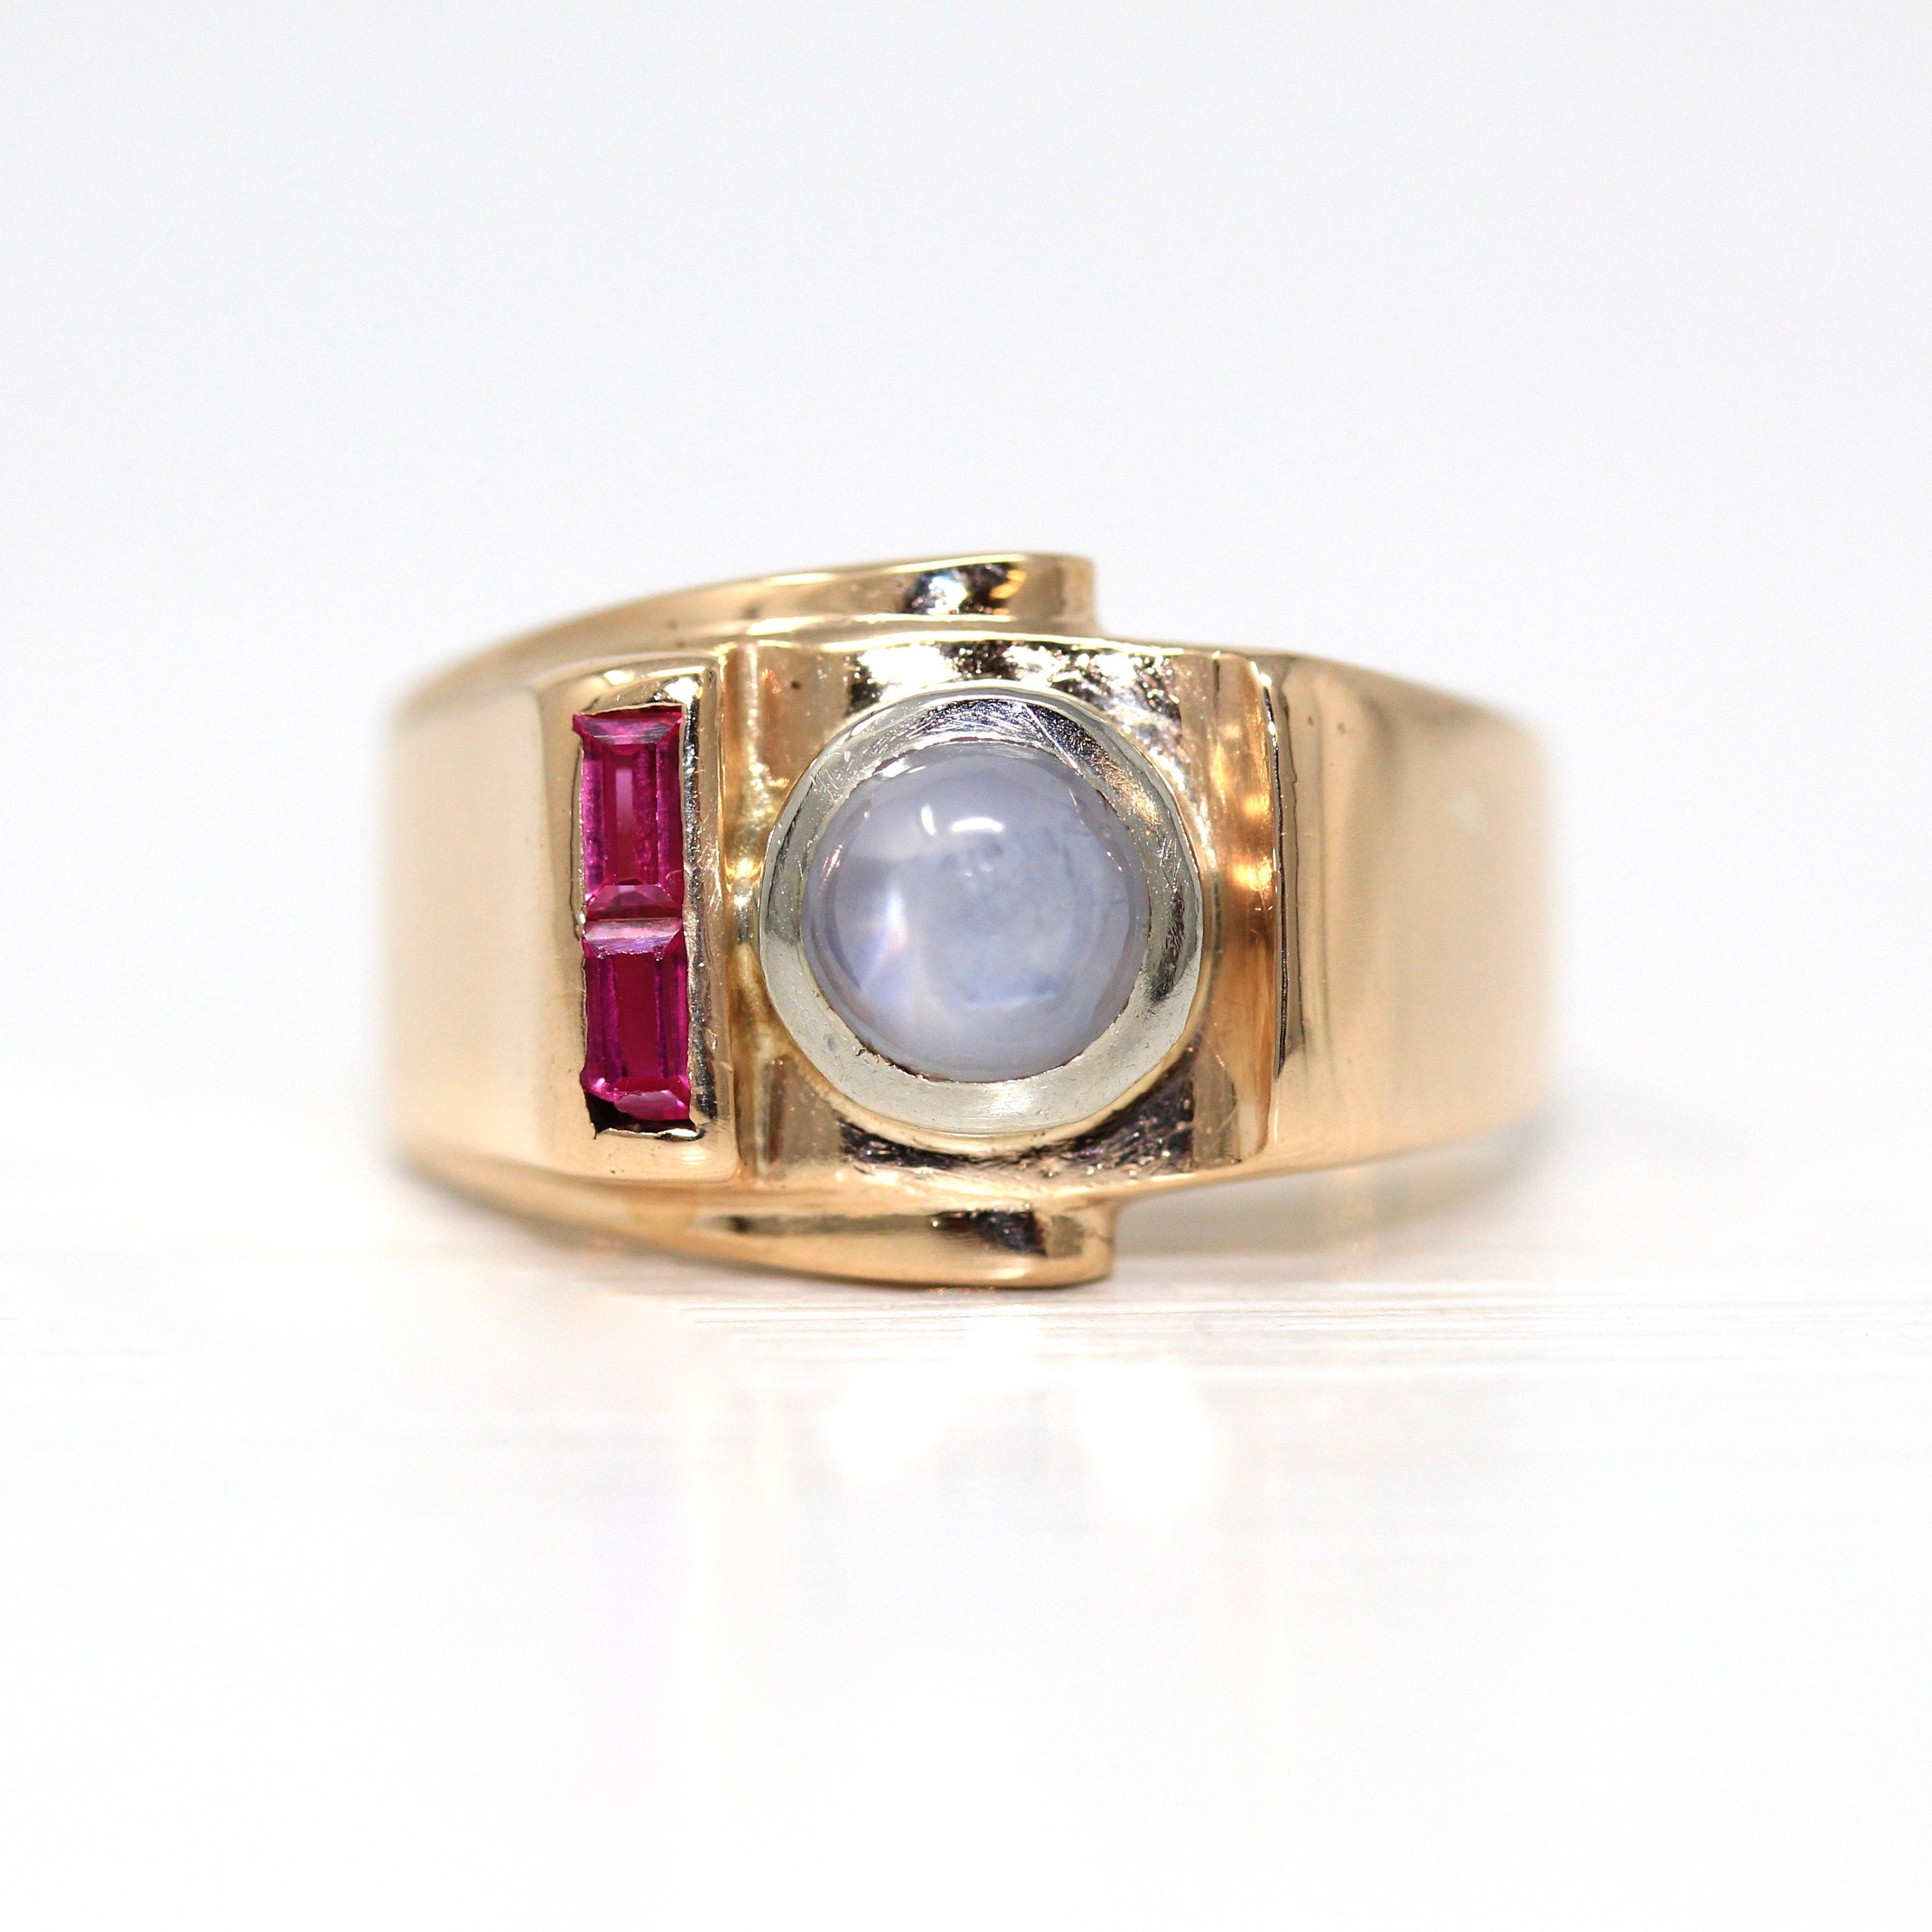 ANTIQUE MENS BLUE STAR SAPPHIRE RING 14K YELLOW GOLD SOLID 5.30CT ESTA -  Garden Of Jewels